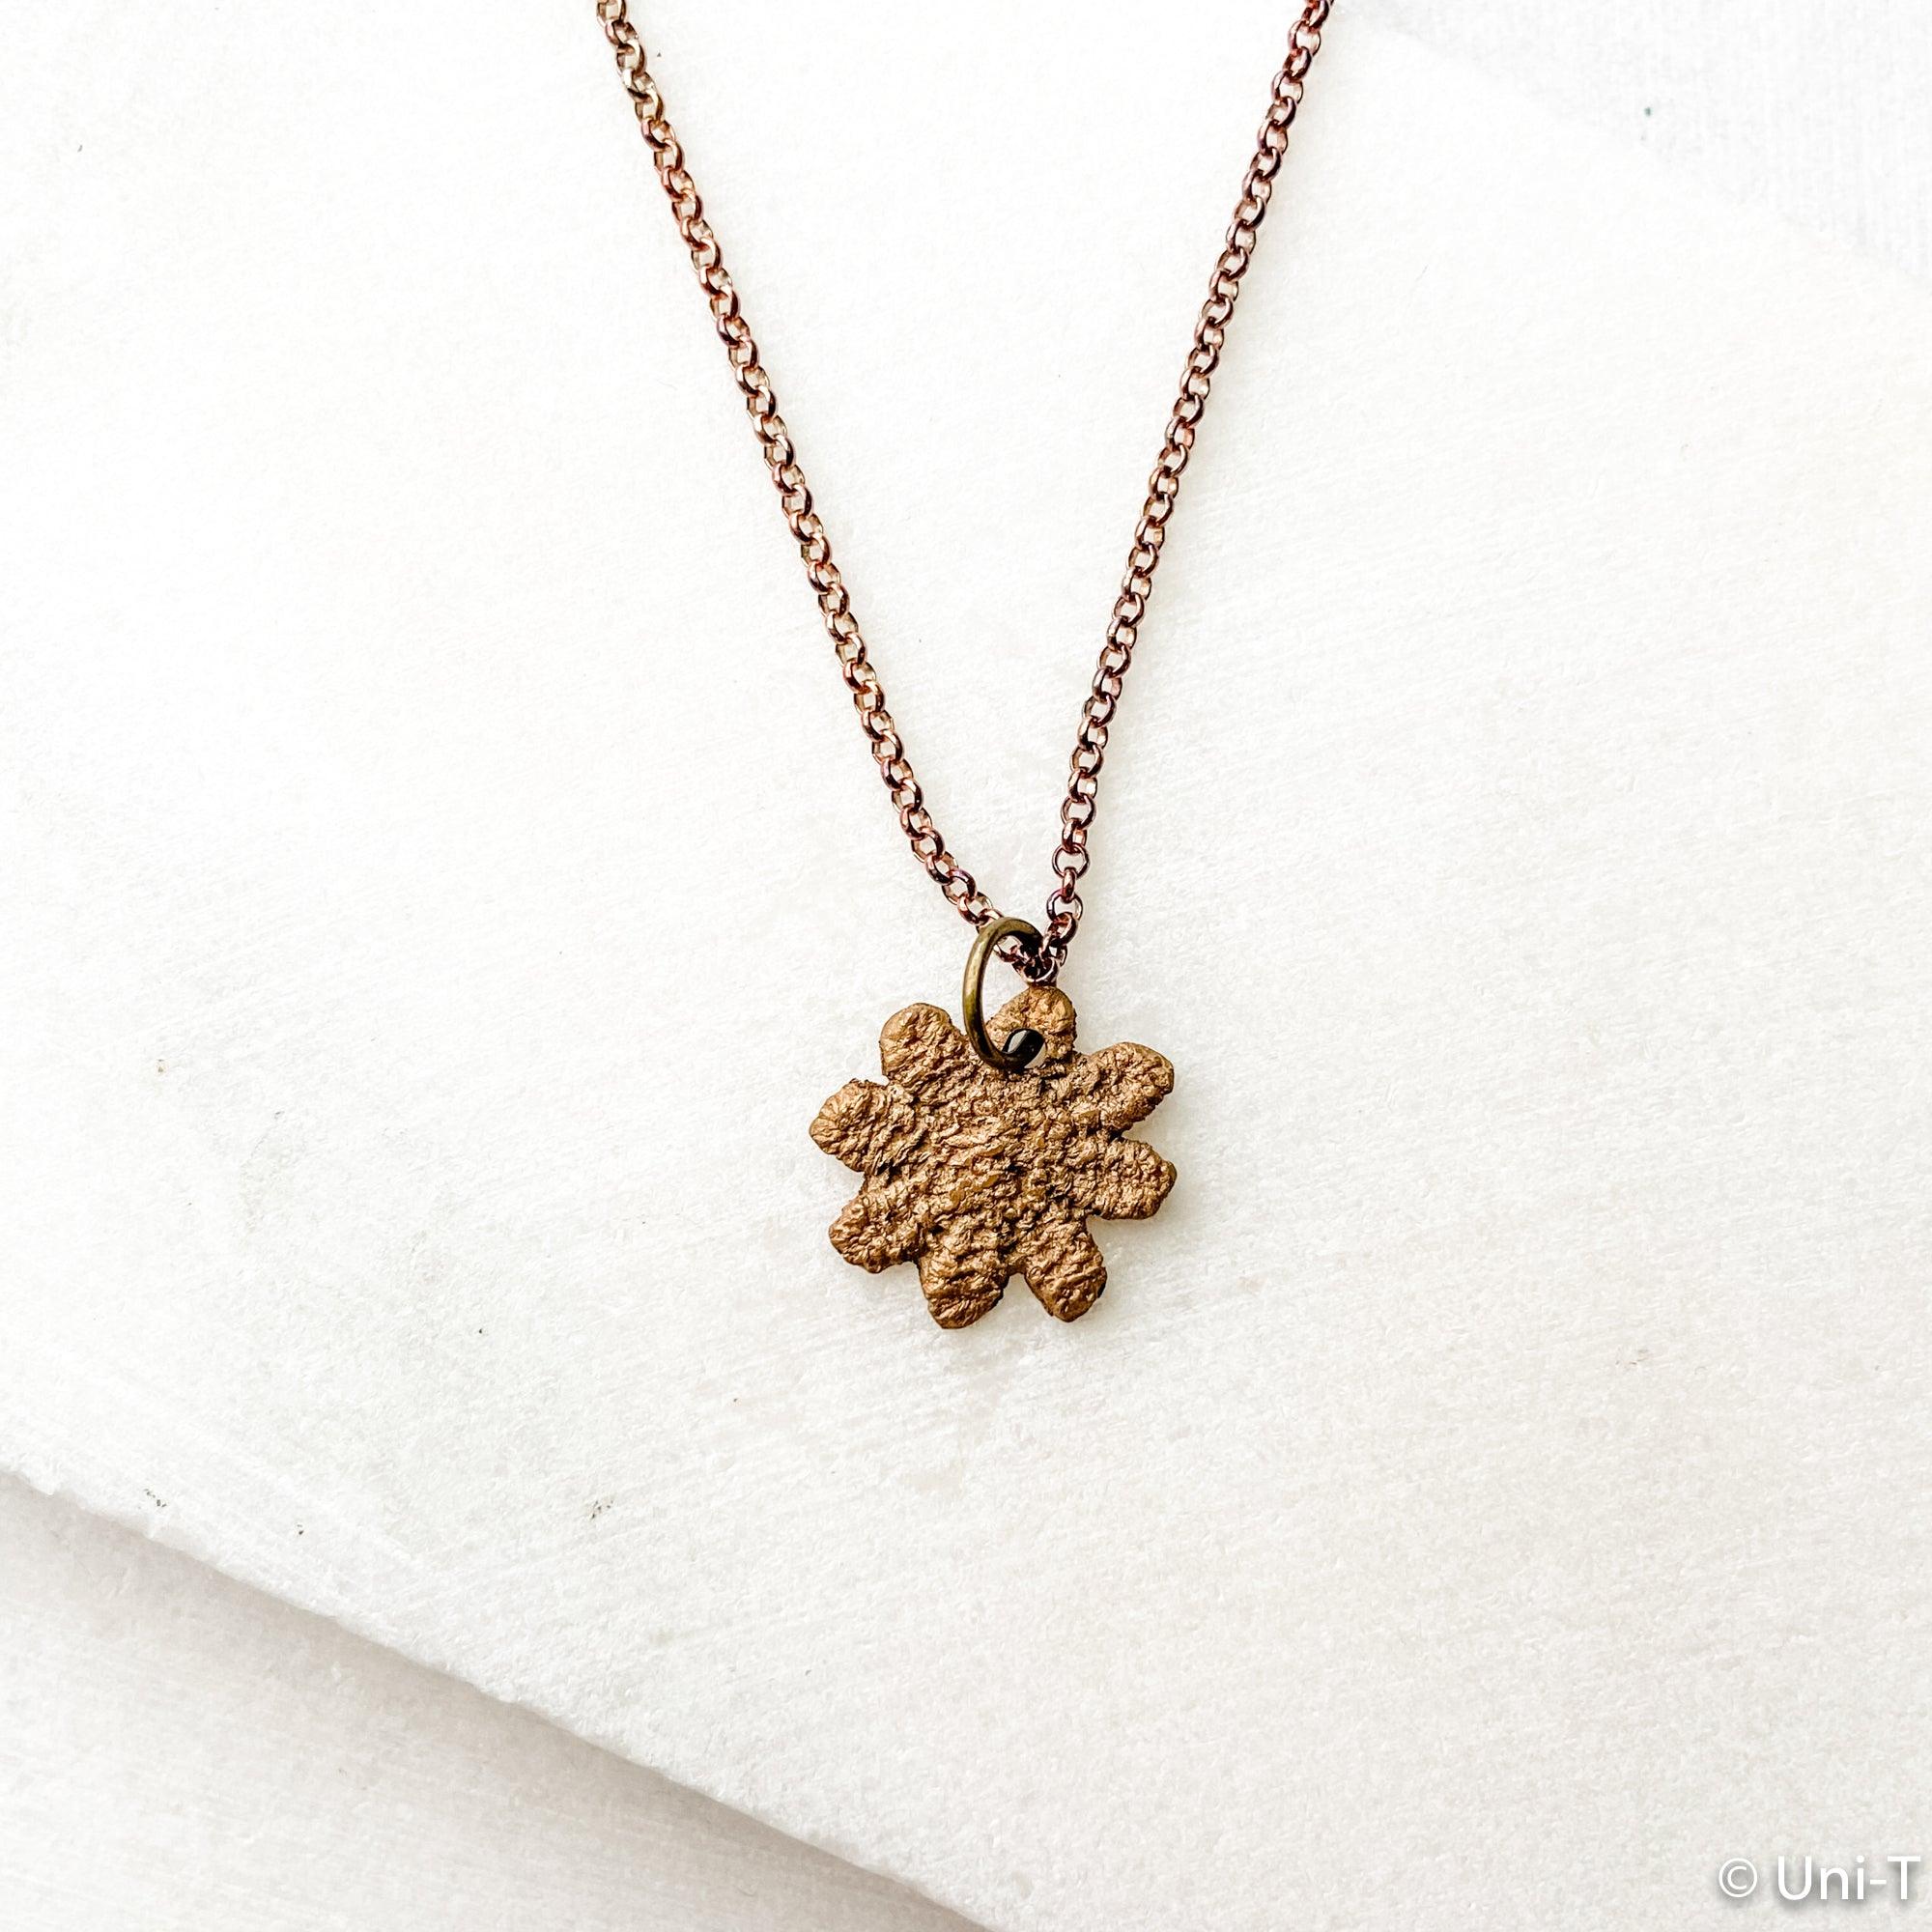 Daisy Necklace, Precious Metal Clay 99% Pure Bronze with Sterling Silver Chain Uni-T Earrings